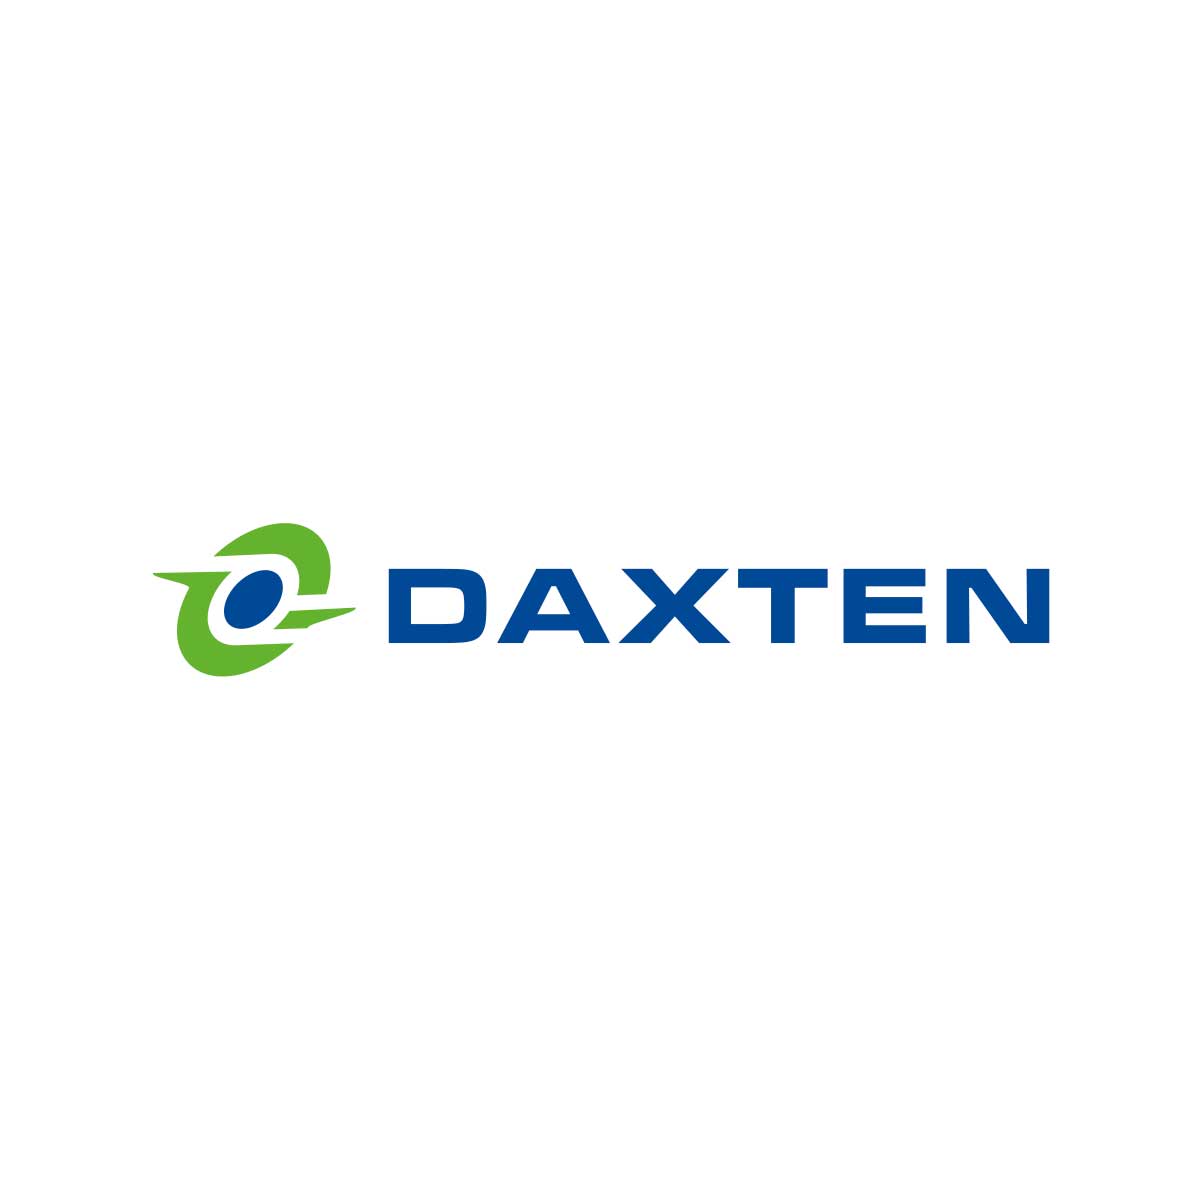 Daxten logo, one of the Power Towers' partners